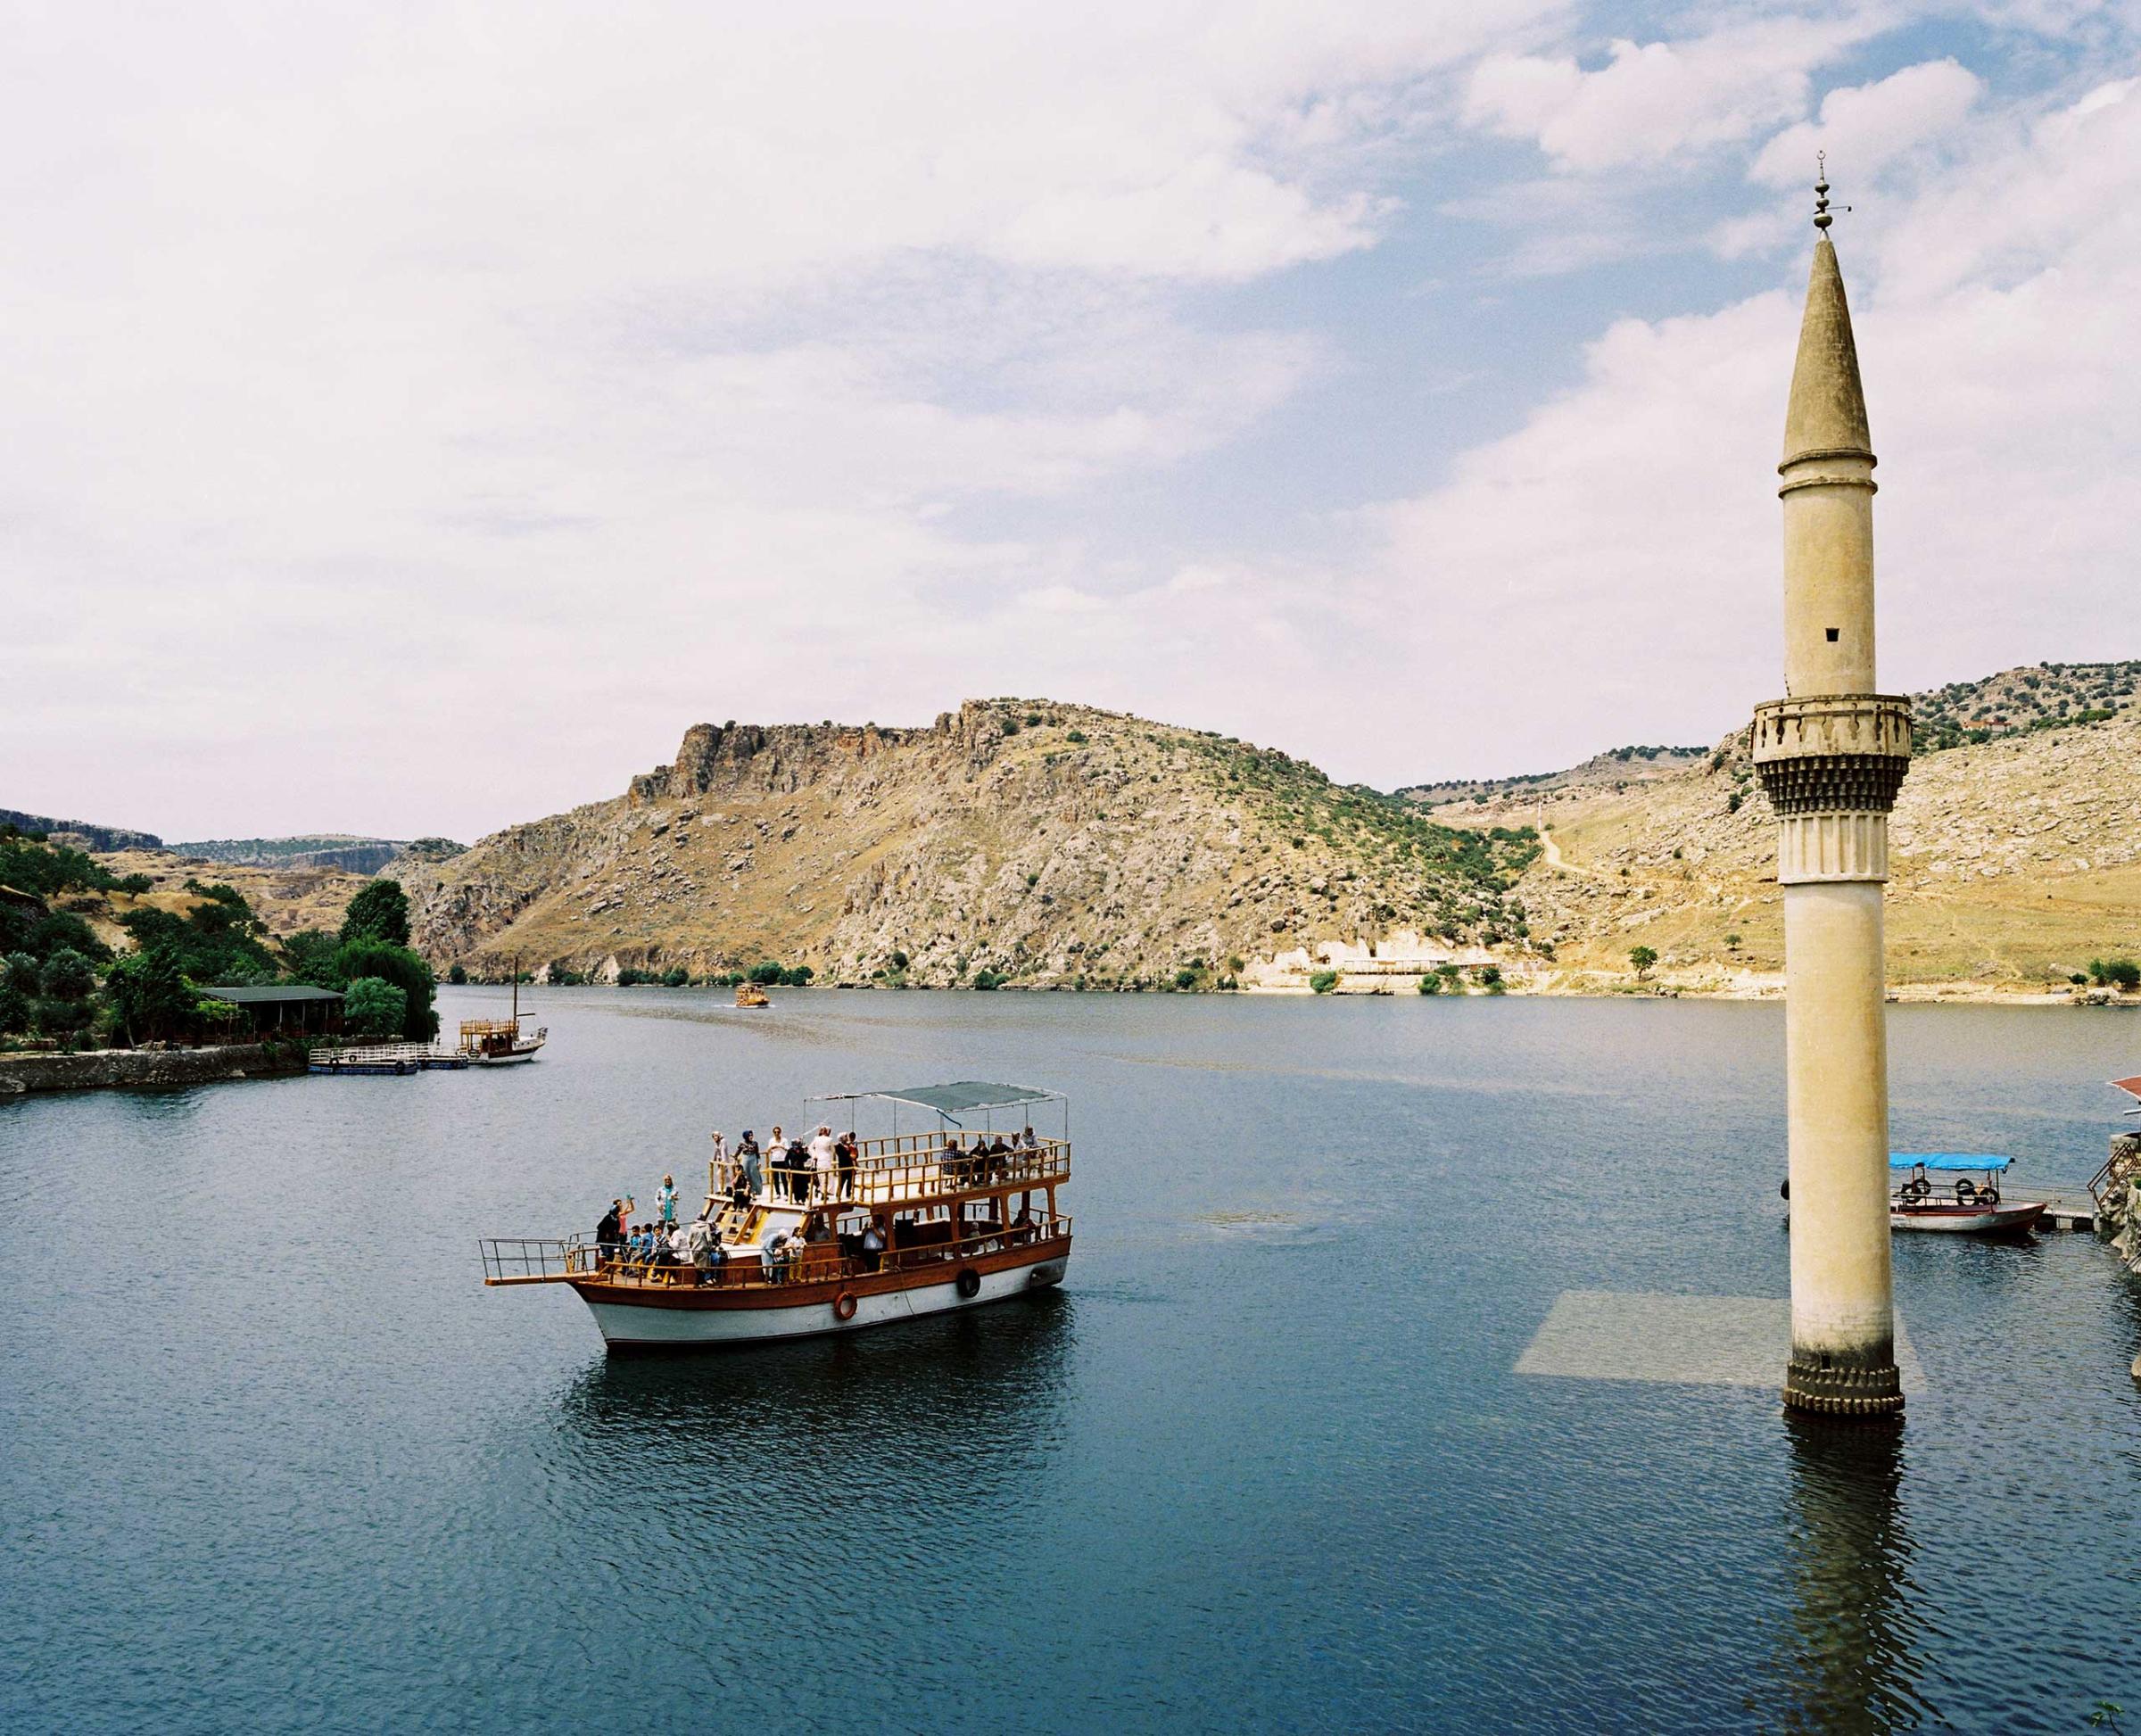 A tourist boat tour is visiting the former Savaçan Village flooded by the reservoir lake of the Birecik Dam on the Euphrates river. The dam was built on top of the ruins of the ancient city of Zeugma. The inhabitants of Halfeti and Savaçan were displaced to the city of Karaotlak (also called New Halfeti) where the building of the new town is now complete by the Housing Development Administration of Turkey. Halfeti,Turkey Turkey